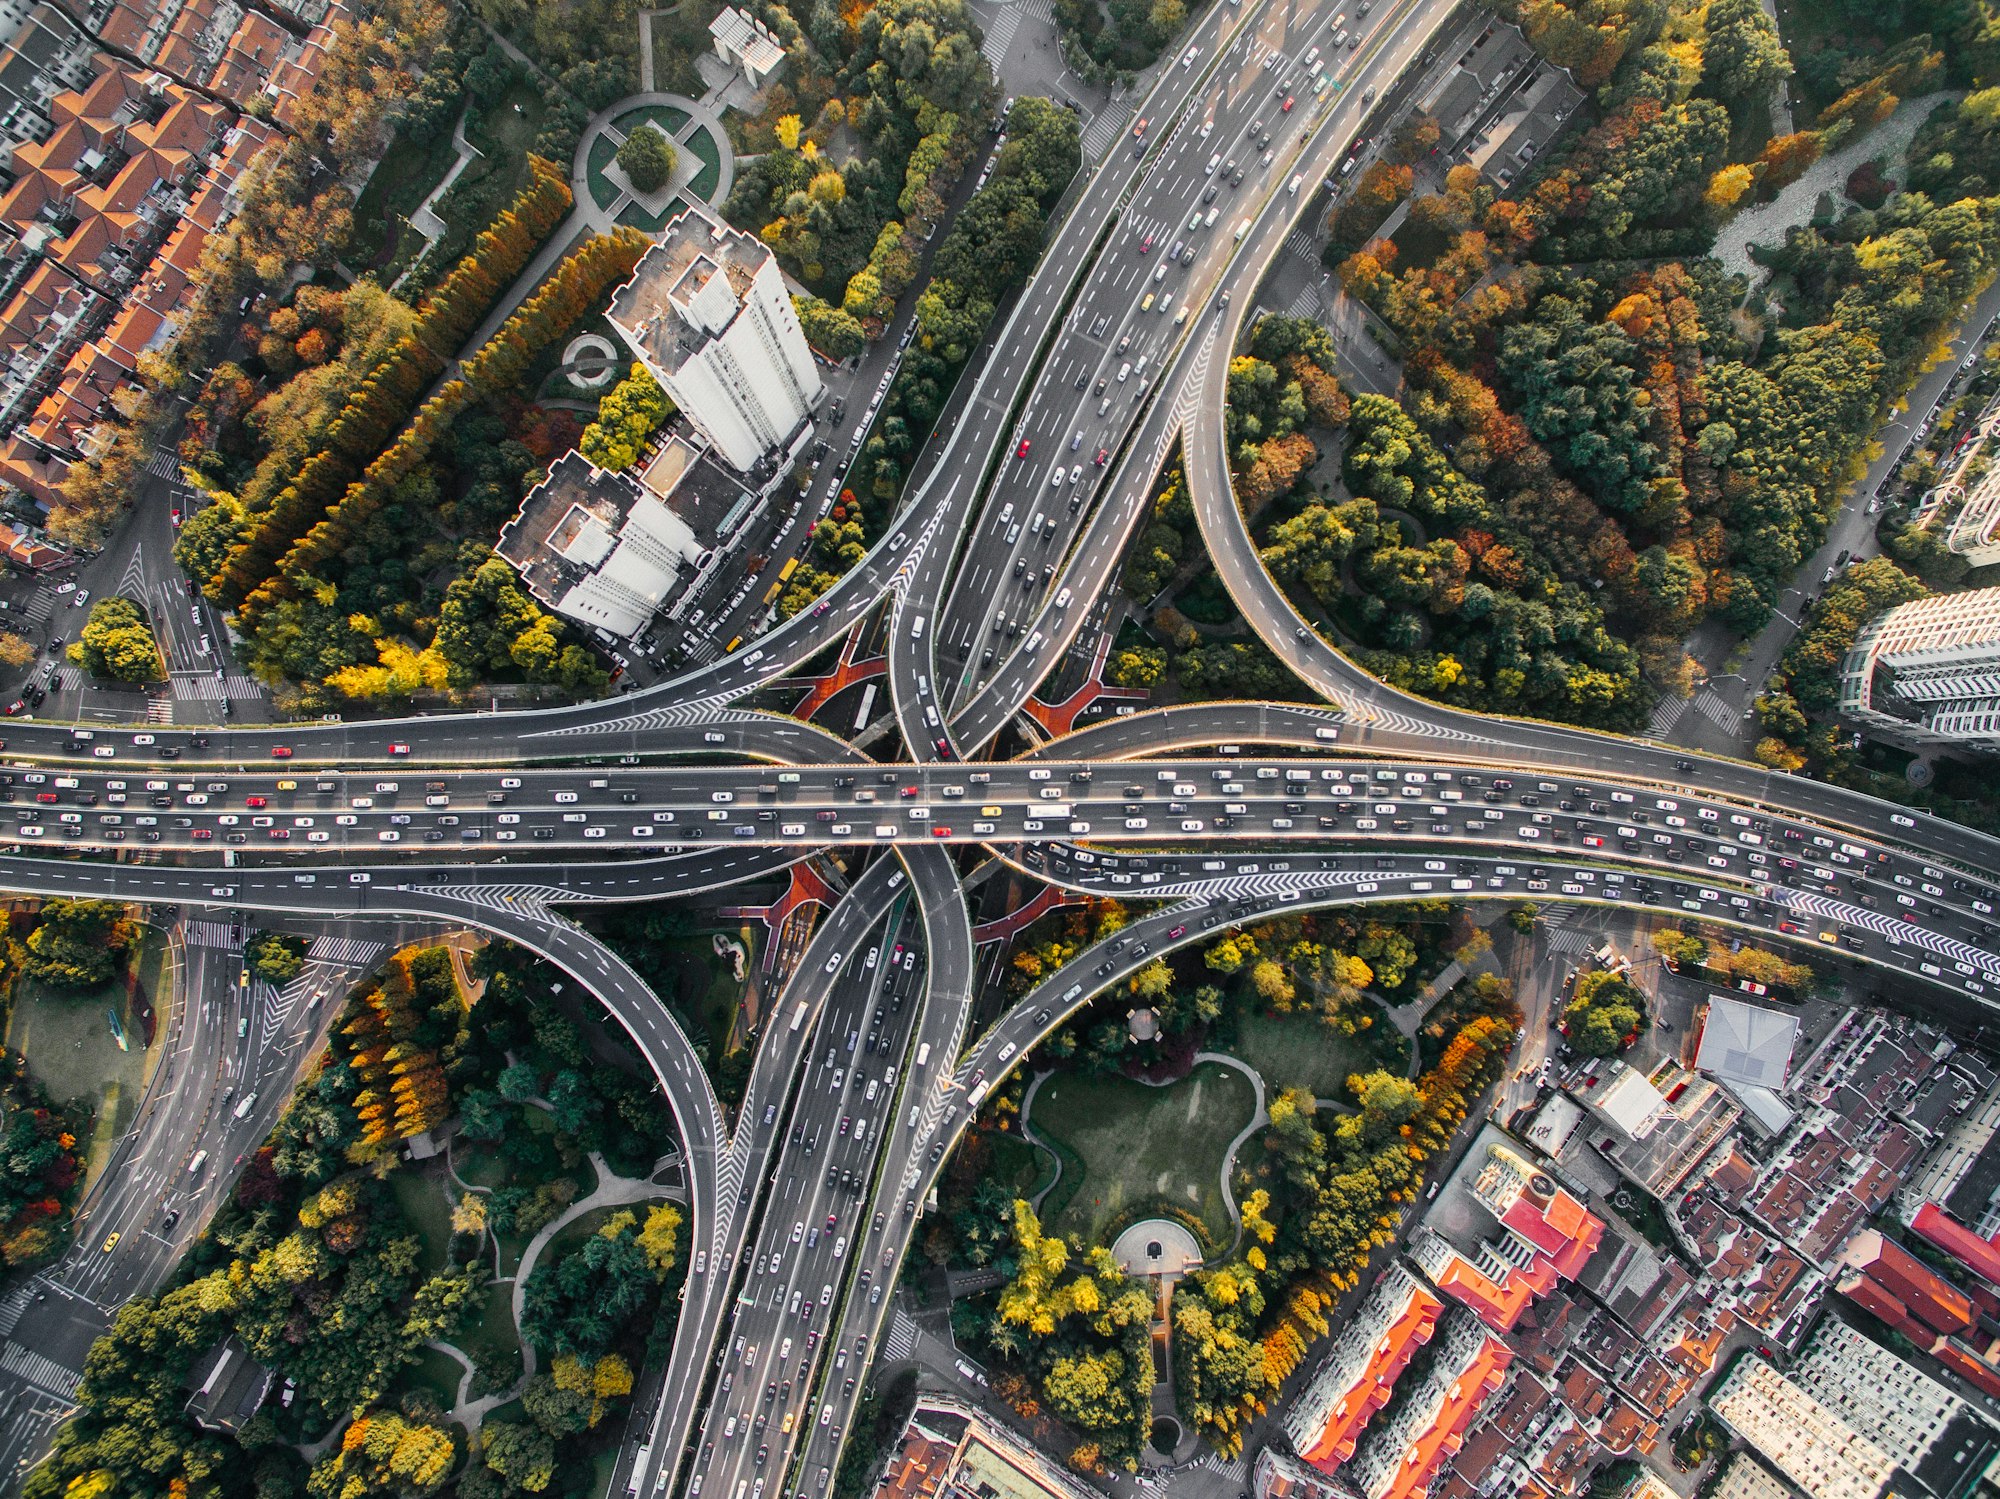 The power of data: designing data-driven transportation systems